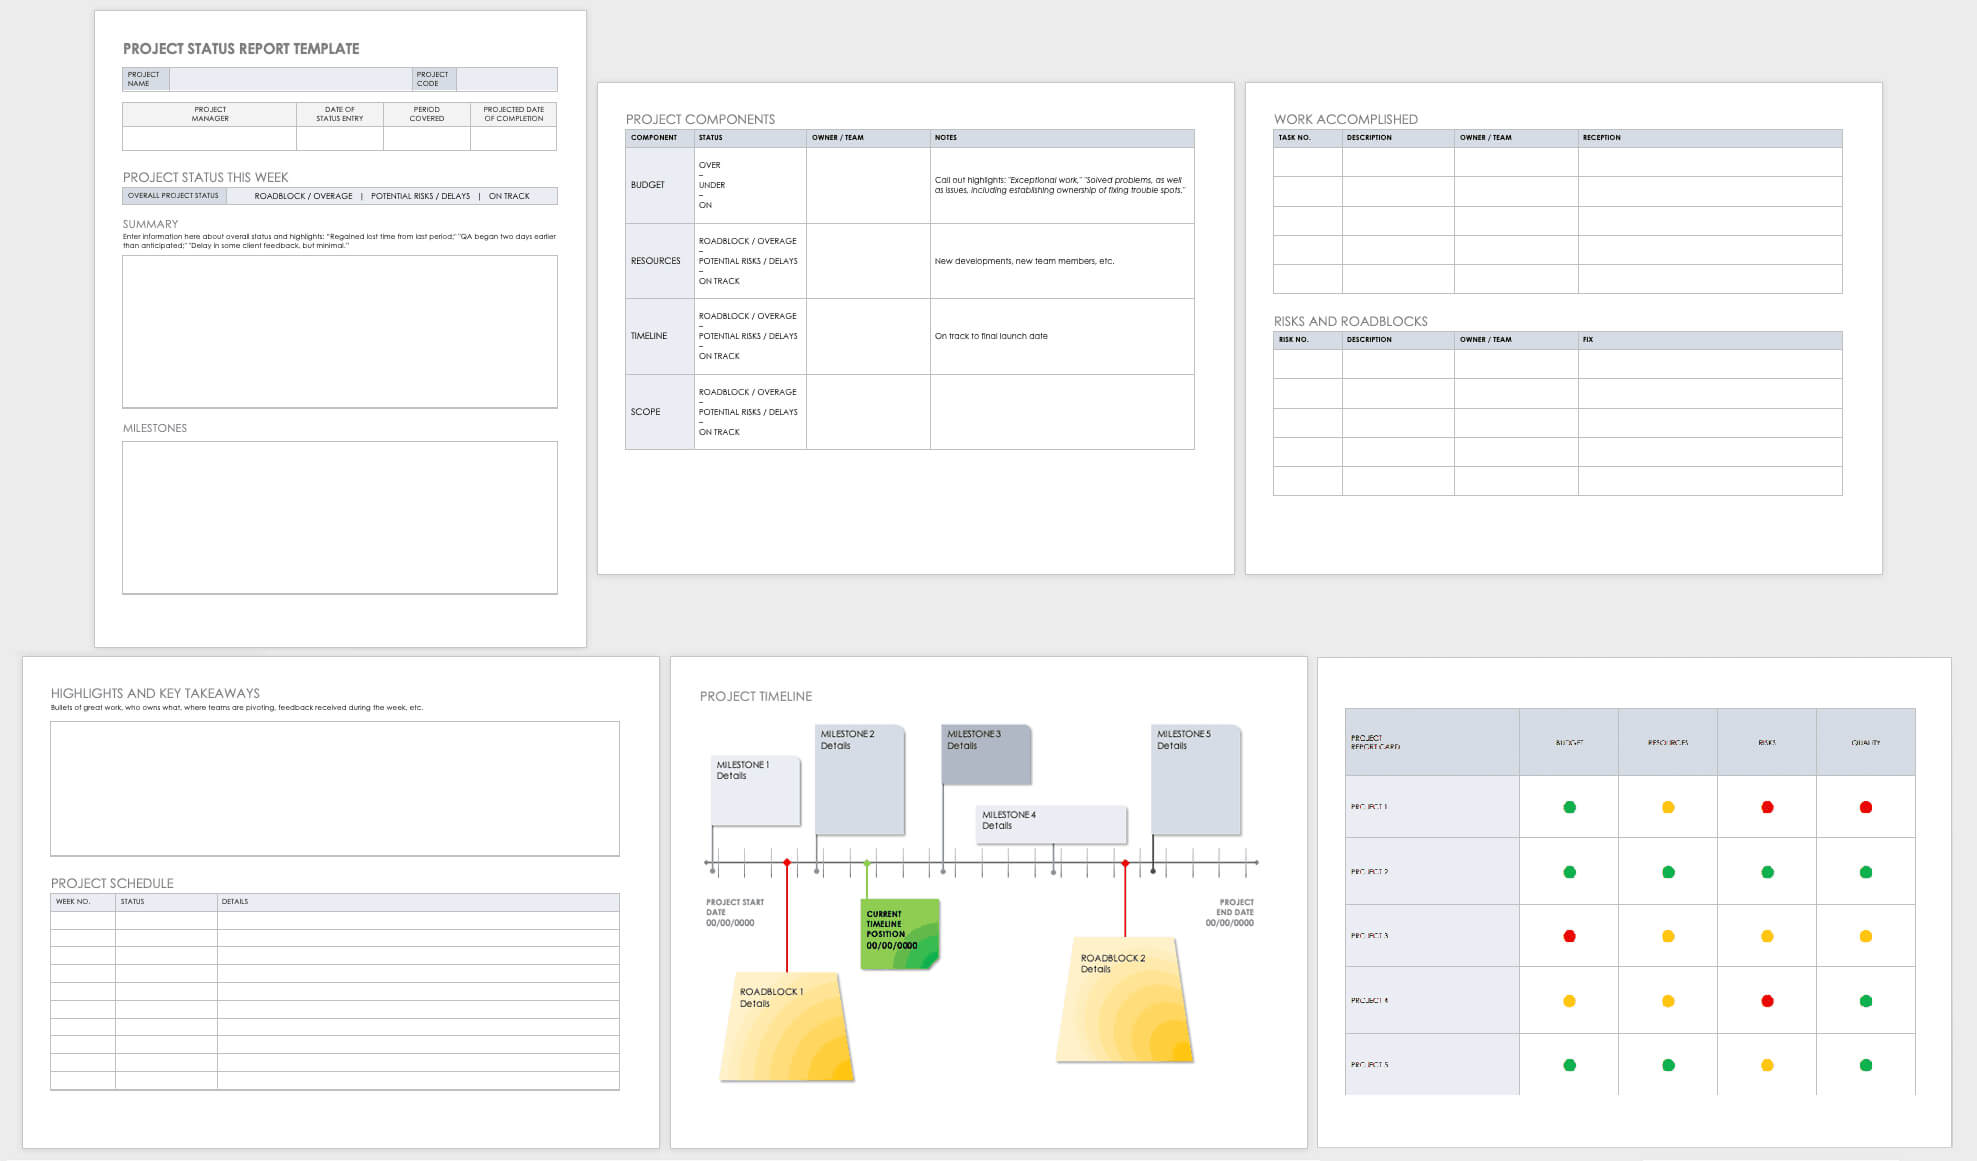 Free Project Report Templates | Smartsheet With Executive Summary Project Status Report Template